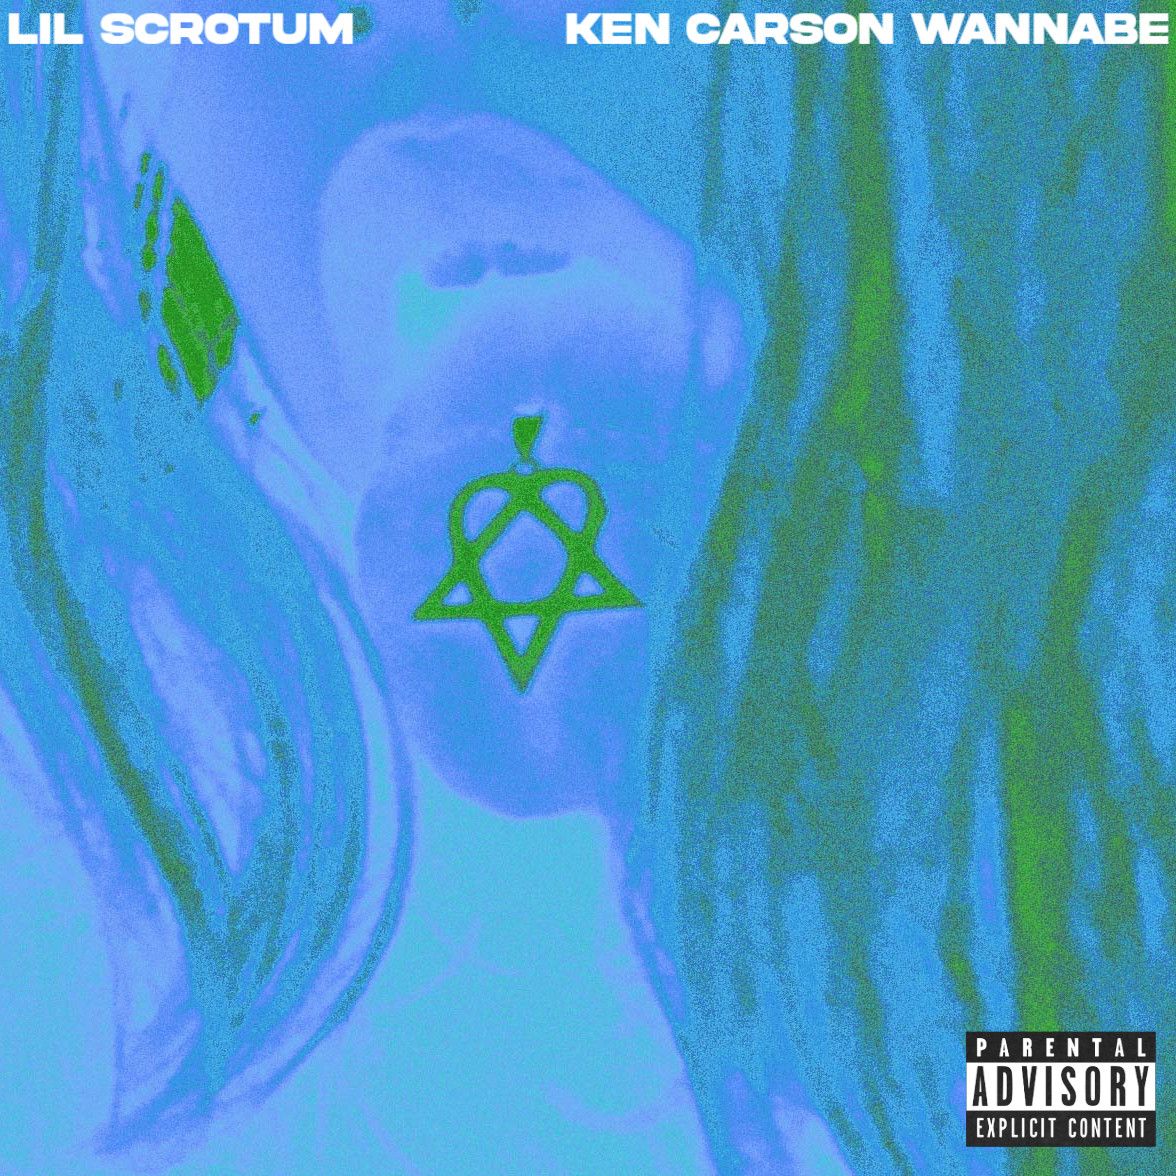 Lil Scrotum - Ken Carson Wannabe review by lilscrotumoffic - Album of ...